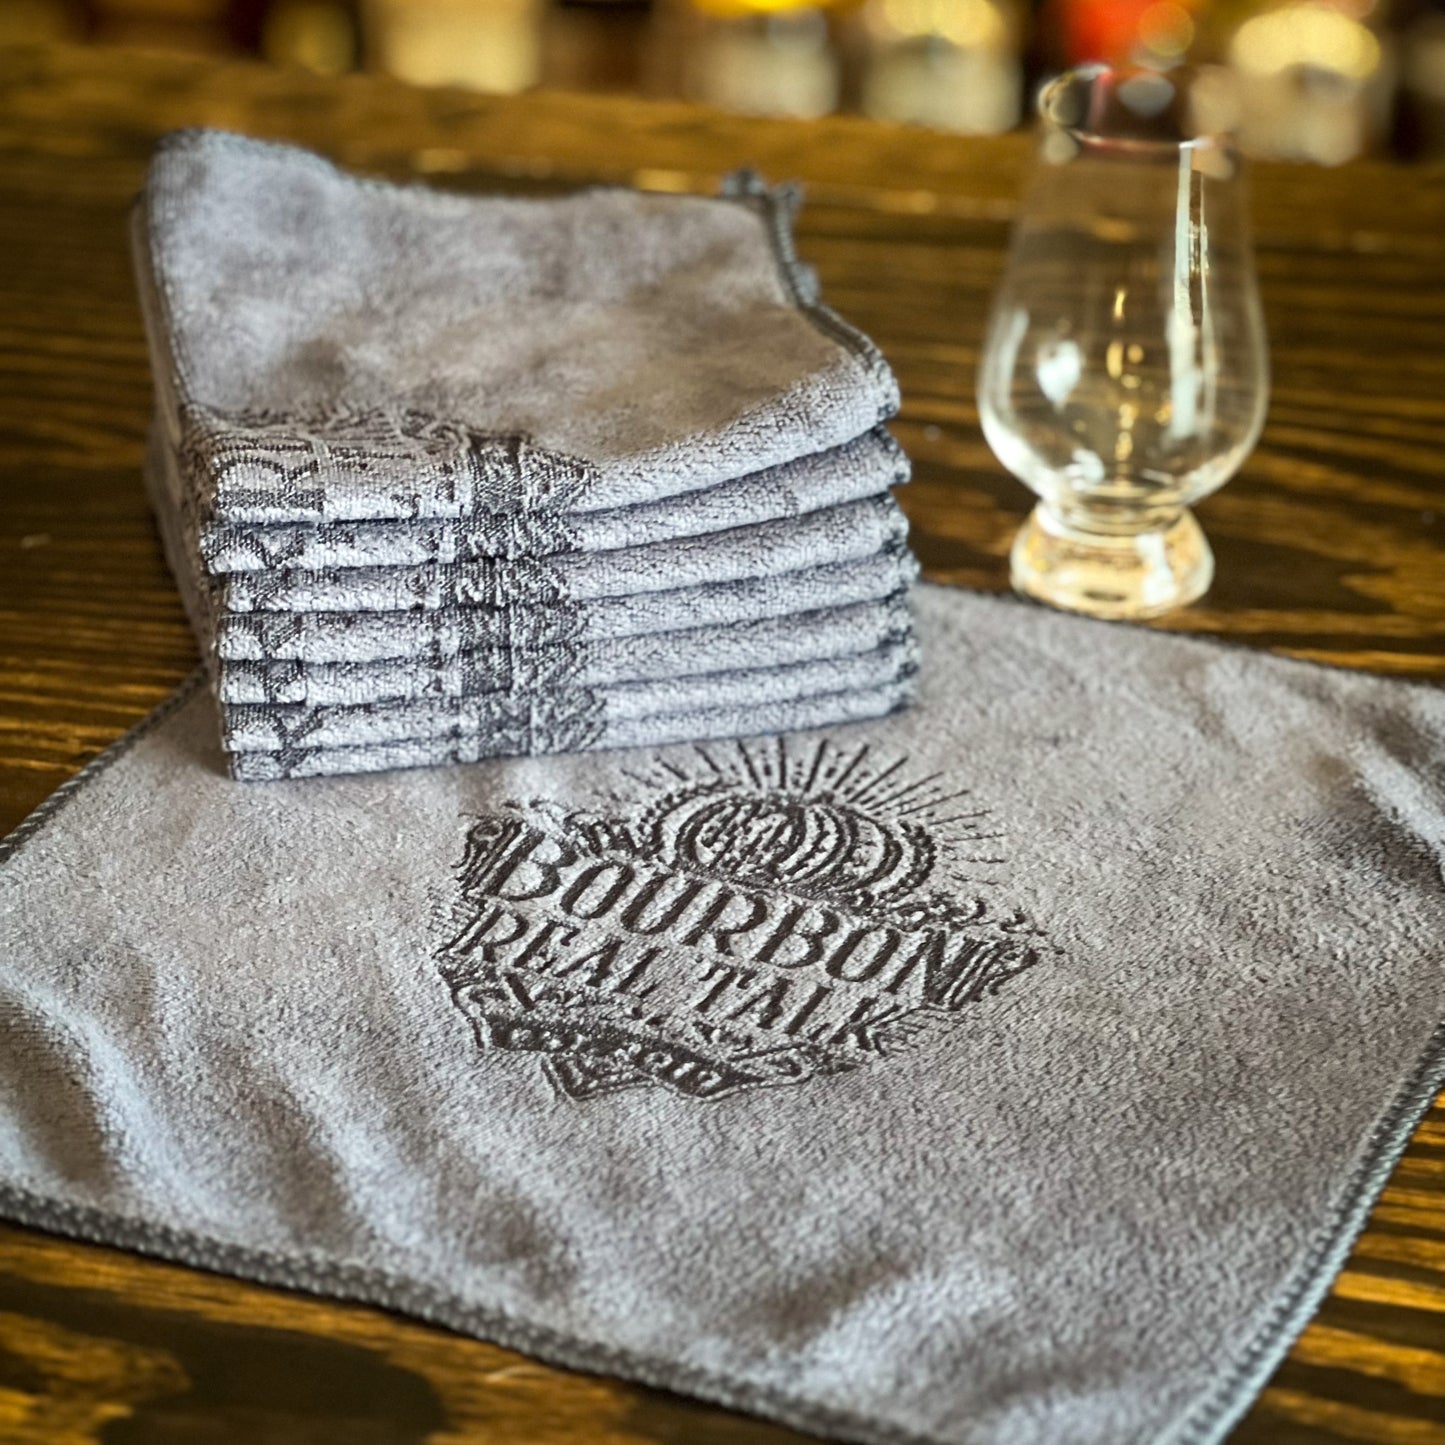 gray microfiber cloth with laser printed logo, there is a stack of folded cloths  next to a glencairn whiskey glass